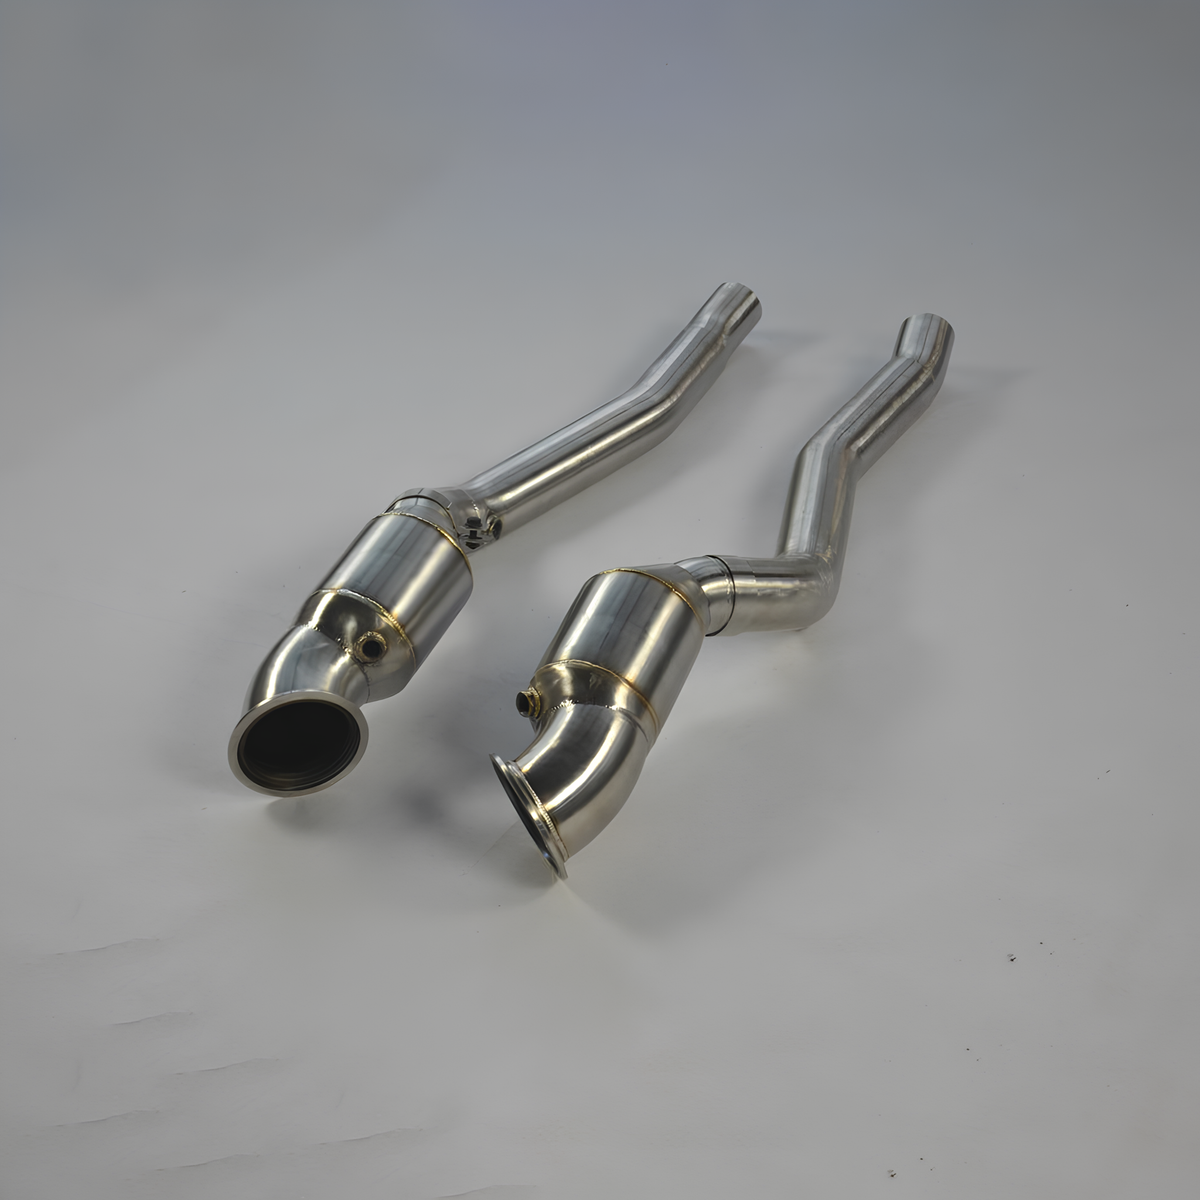 Rstype Downpipe For Ferrari F12 6.3L 2013+ exhaust pipes downpipe heat shield catback exhaust tip valvetronic exhaust muffler